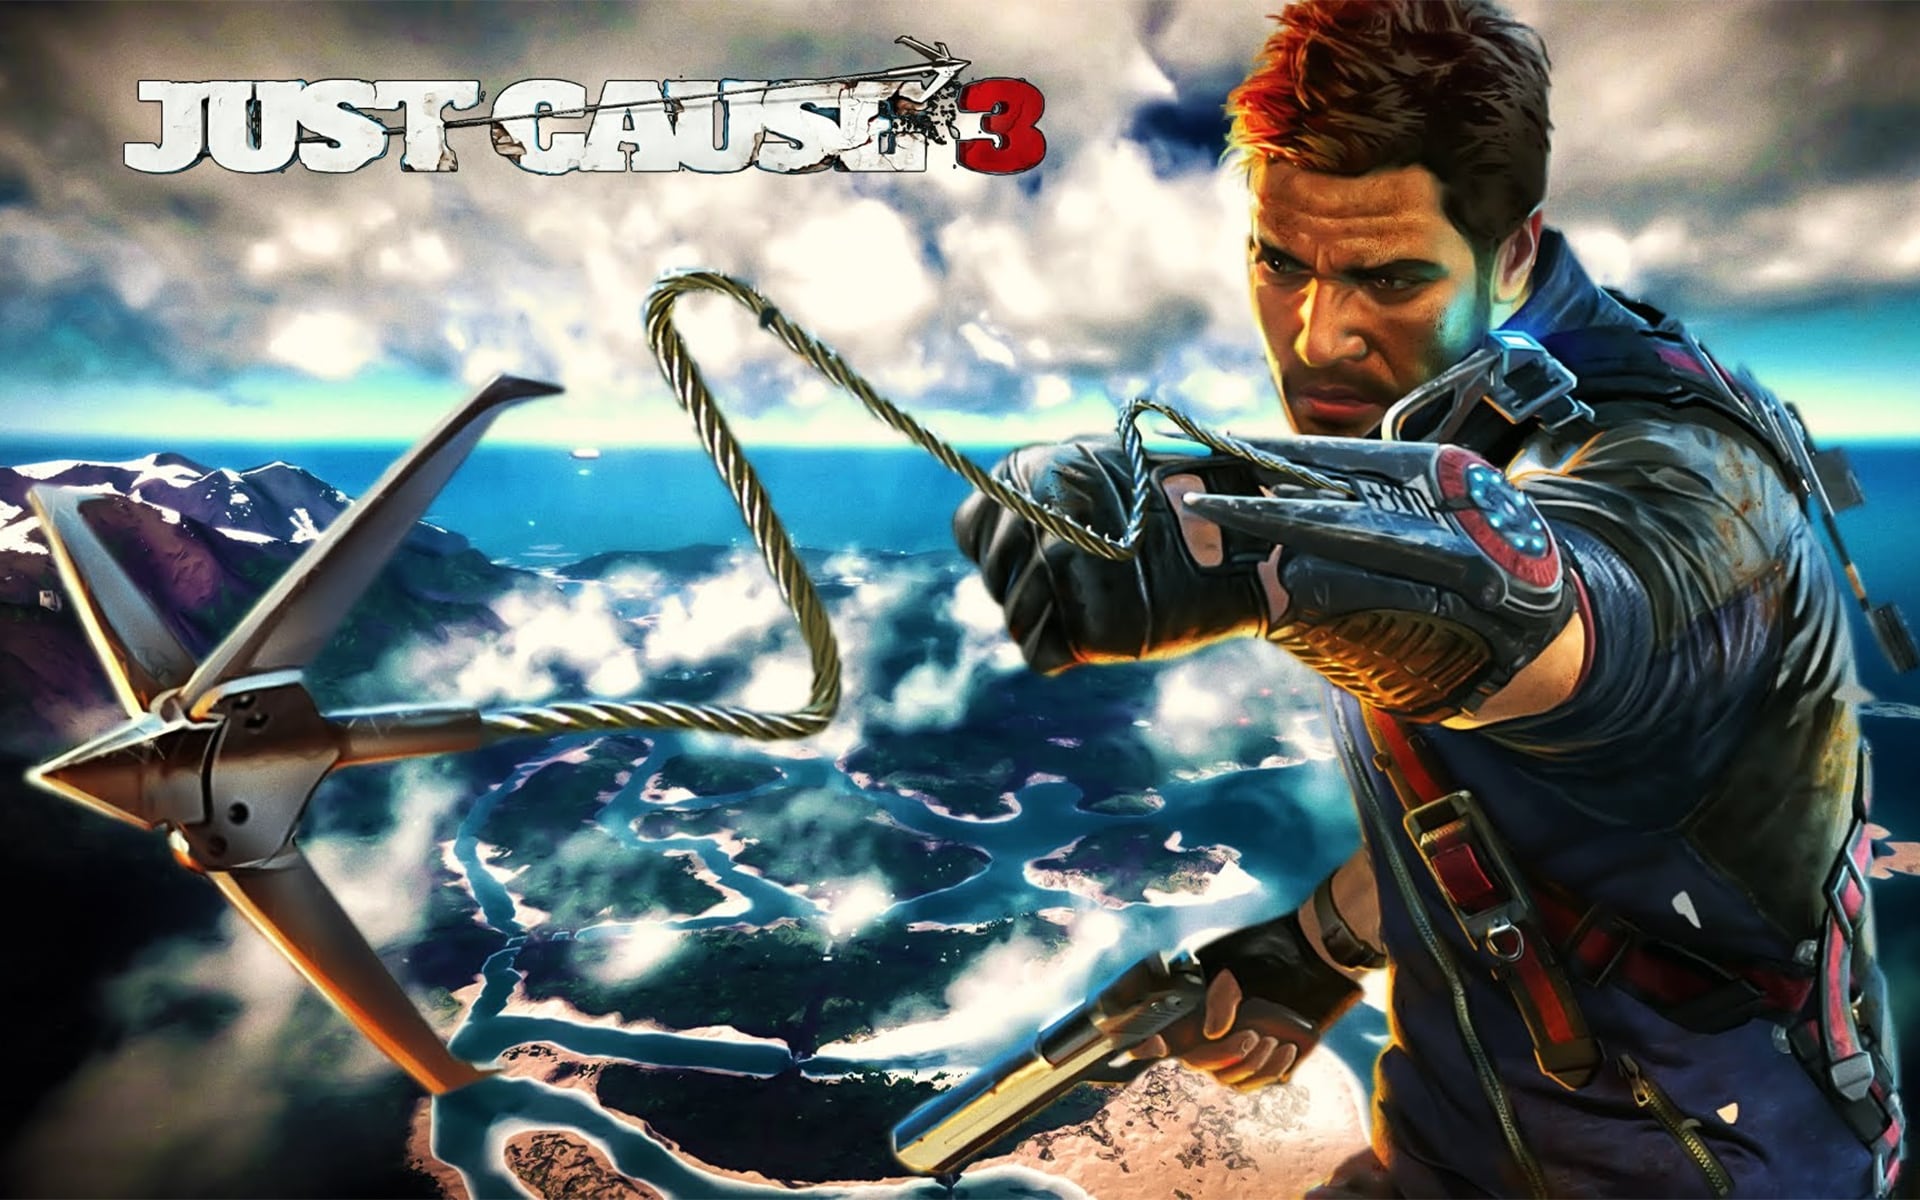 Sky top games. Рико Родригес just cause 1. Игра just cause 3. Just cause 3 экшен. Just cause 6.